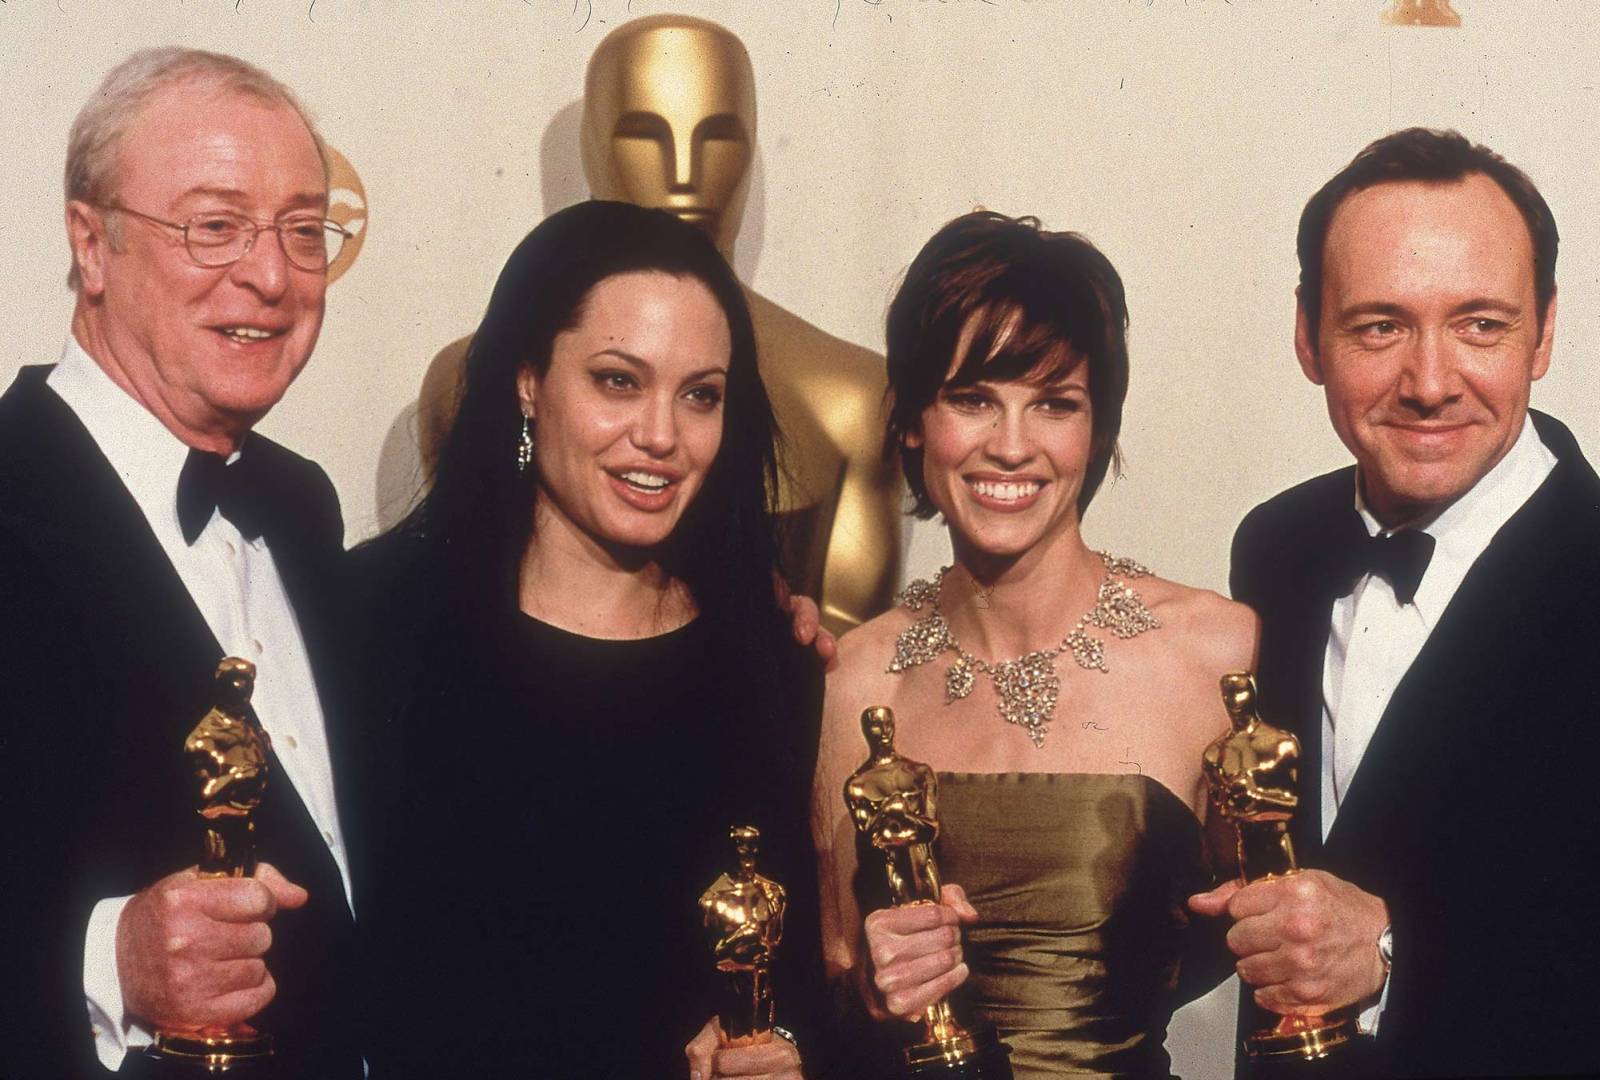 Michael Caine, Angelina Jolie, Hilary Swank i Kevin Spacey ze swoimi statuetkami (Fot. Getty Images)